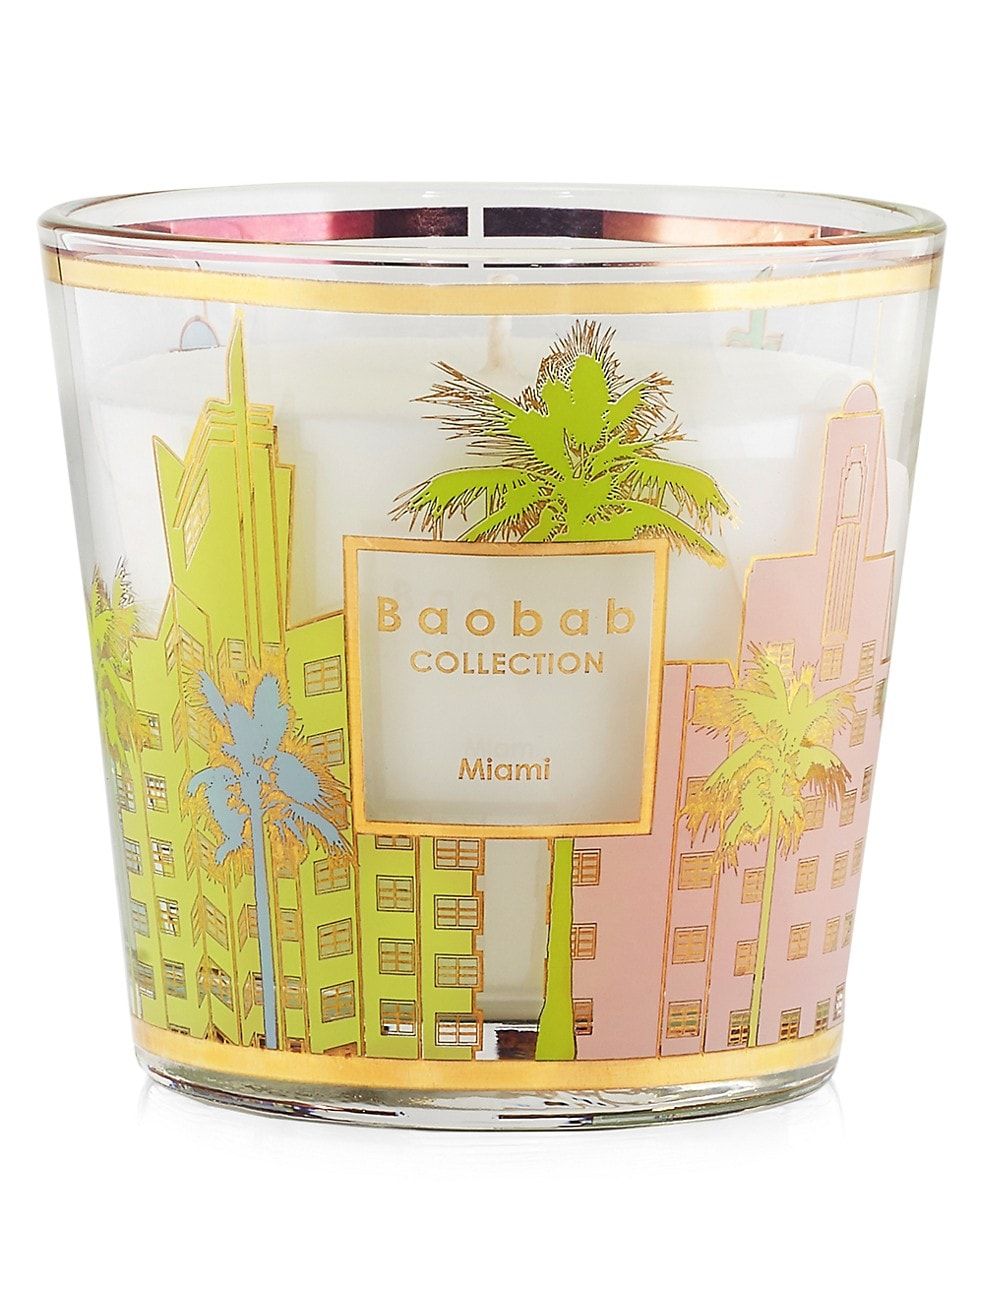 Baobab Collection My First Baobab Miami Candle | Saks Fifth Avenue